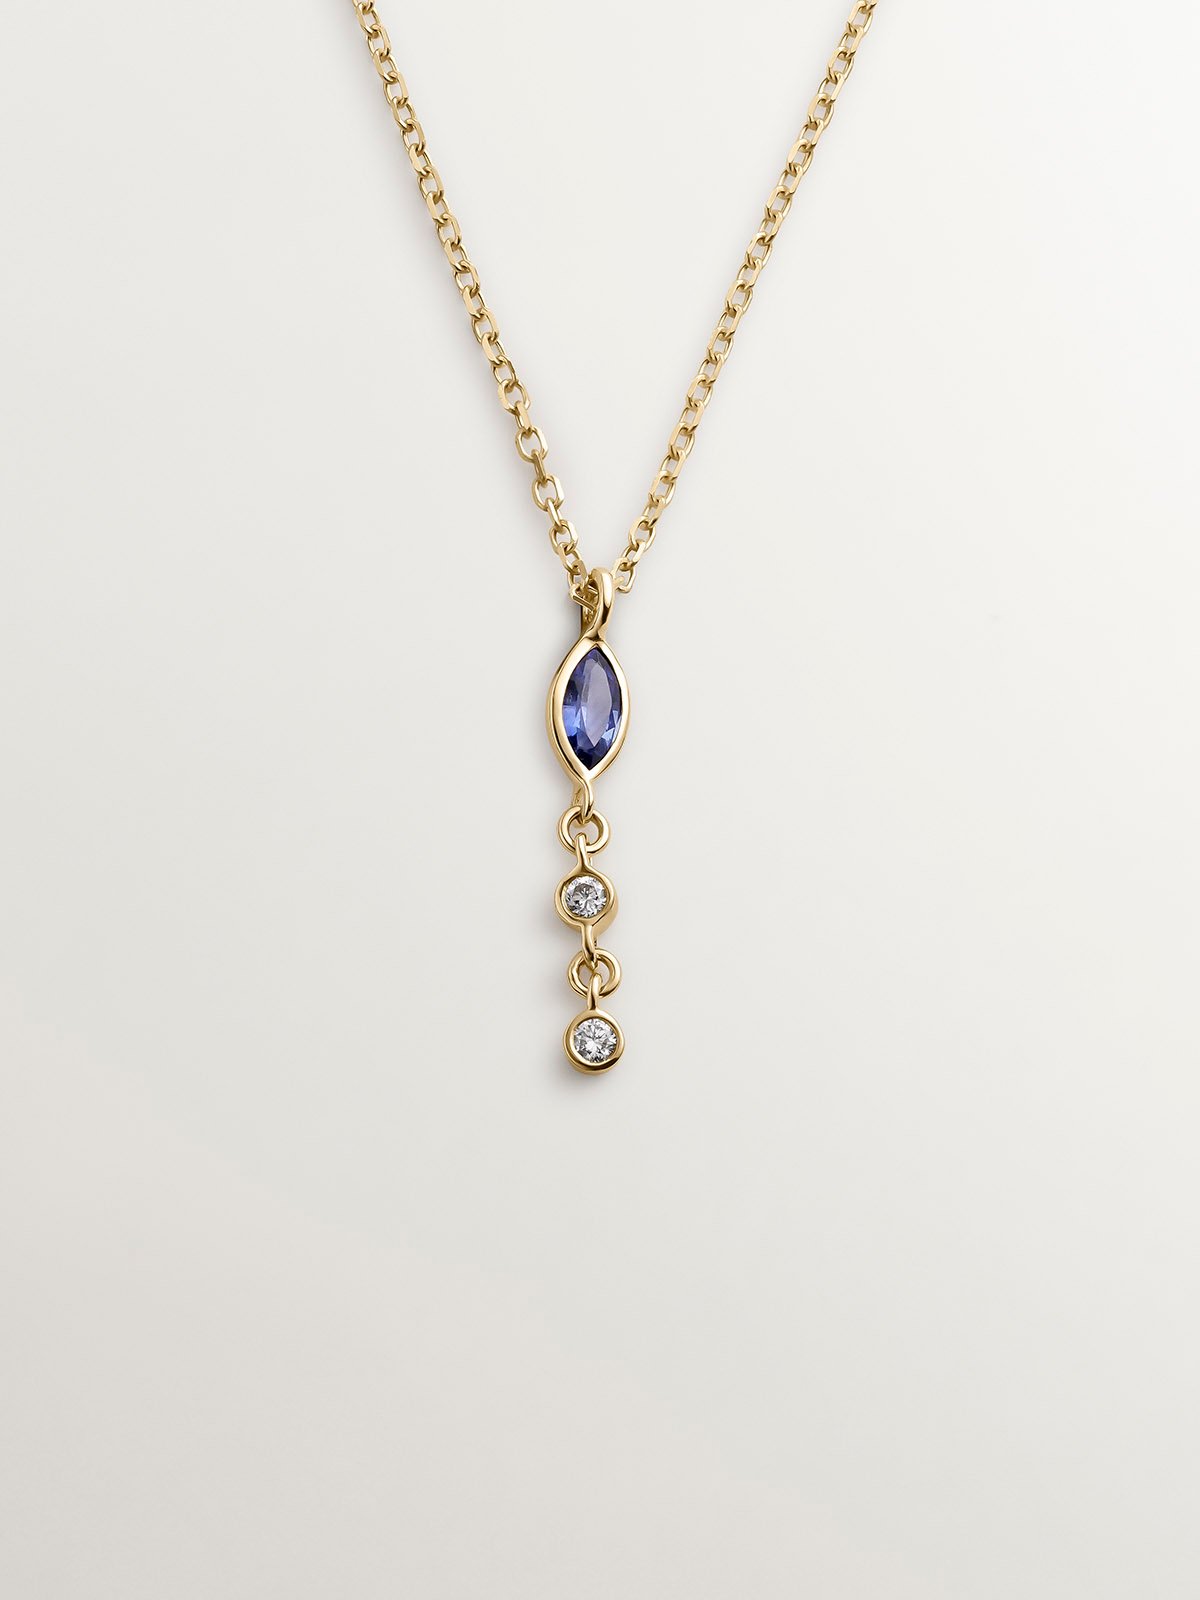 9K Yellow Gold Pendant with Blue Sapphire and Diamonds